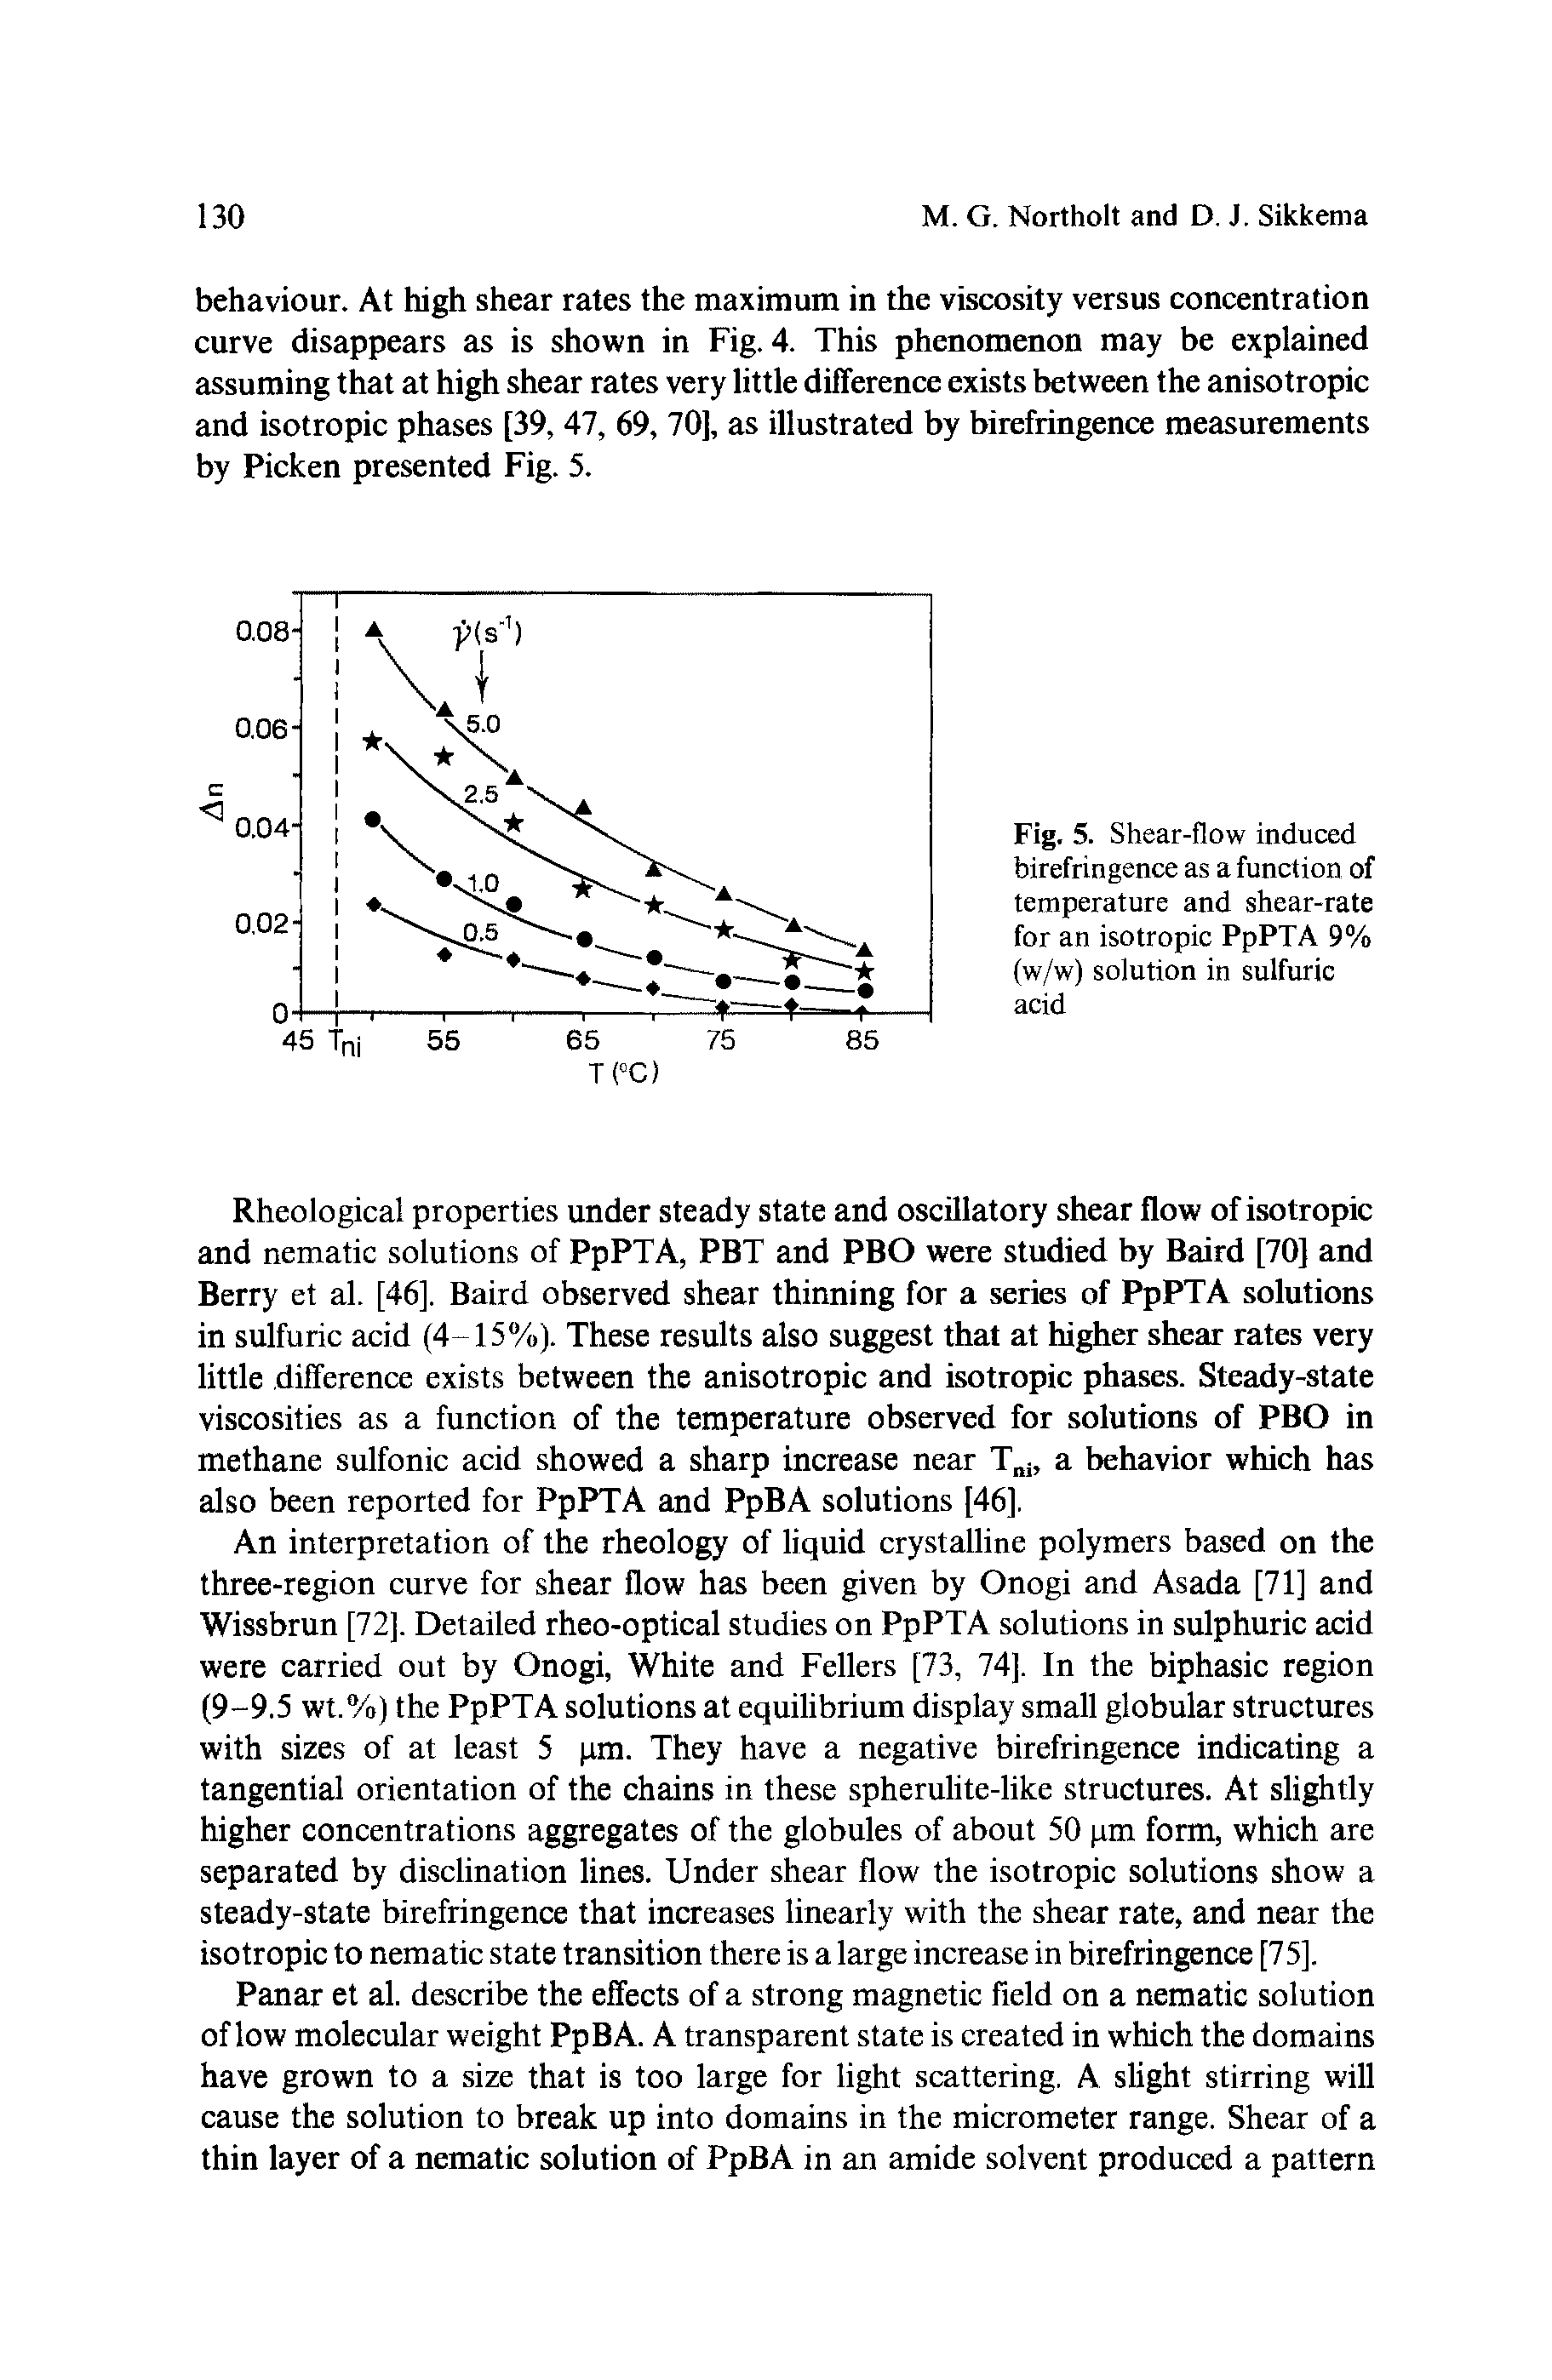 Fig. 5. Shear-flow induced birefringence as a function of temperature and shear-rate for an isotropic PpPTA 9% (w/w) solution in sulfuric acid...